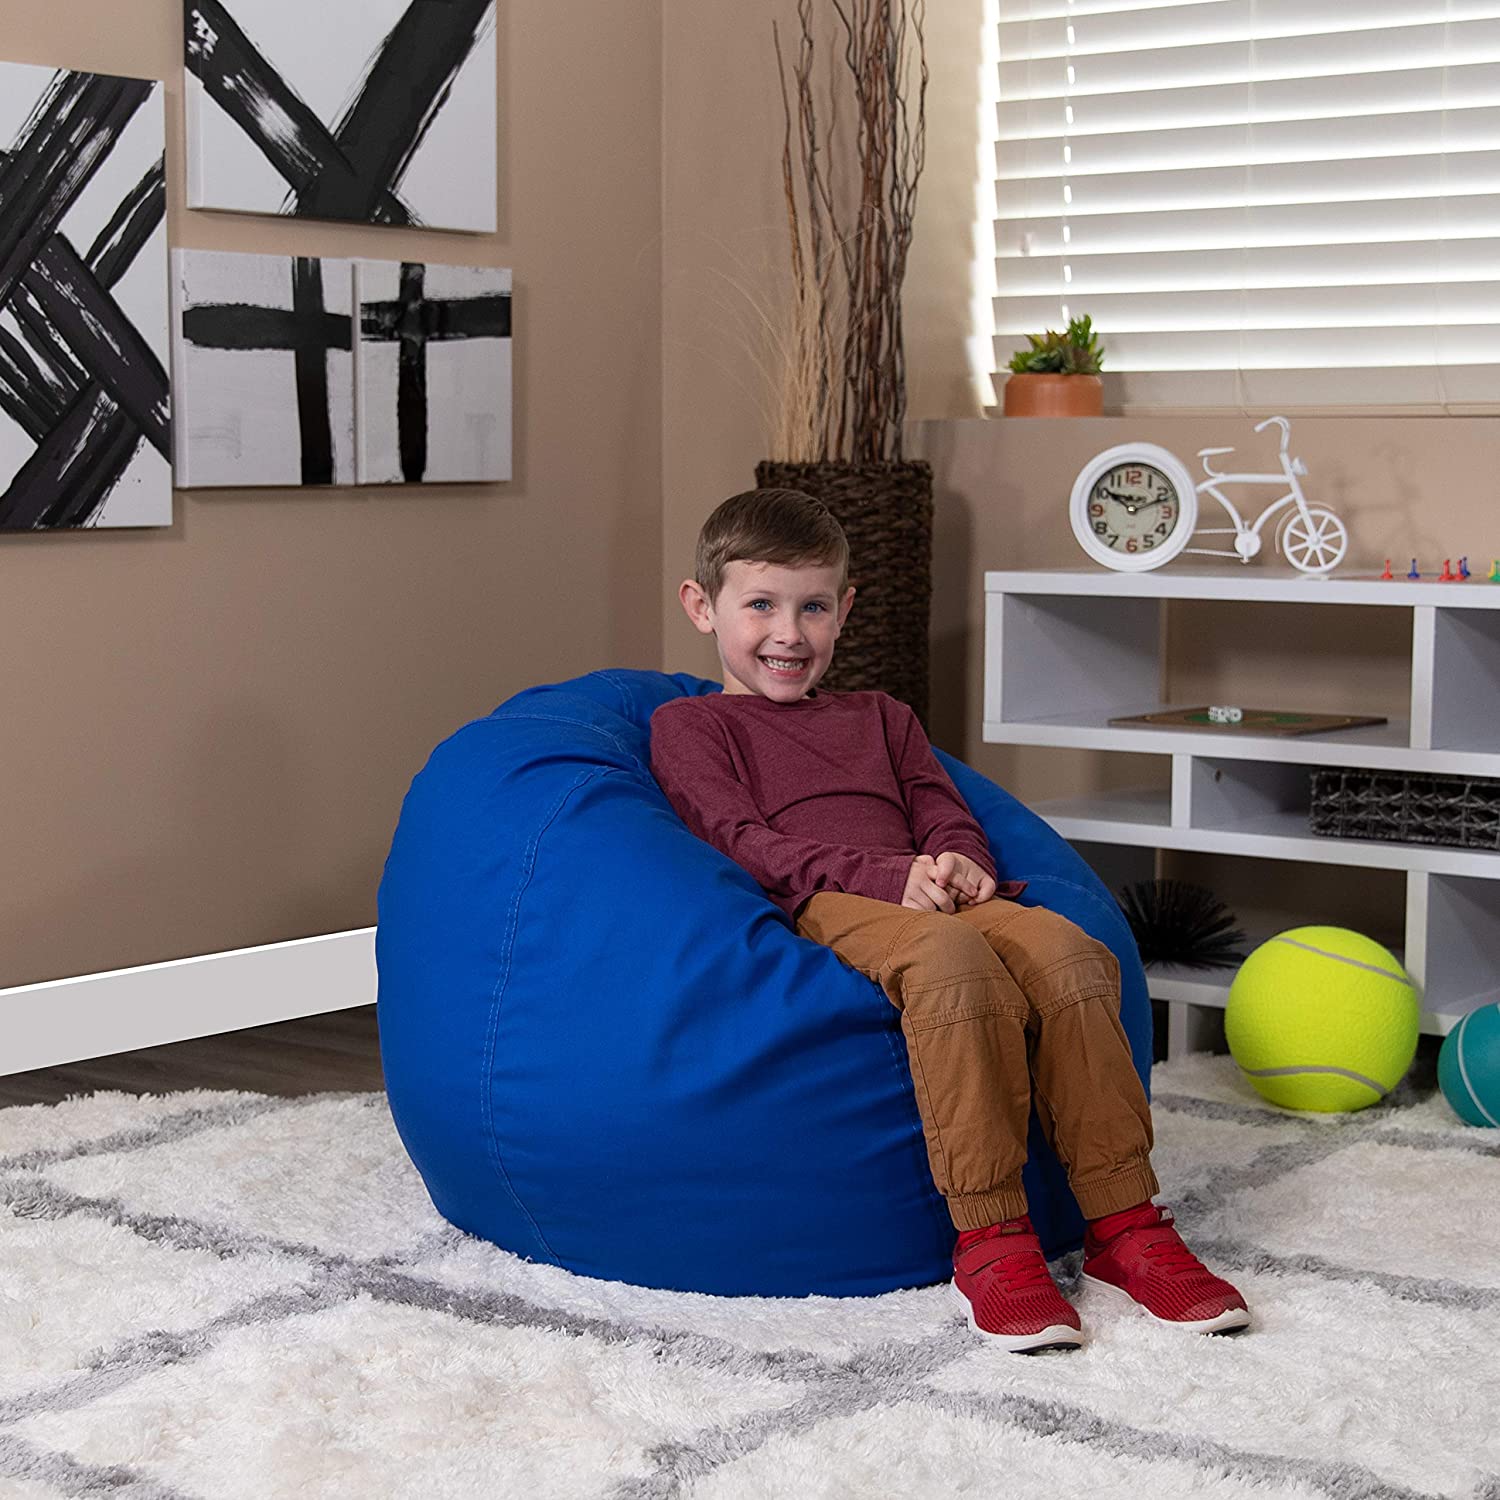 Flash Furniture Oversized Solid Royal Blue Bean Bag Chair for Kids and Adults